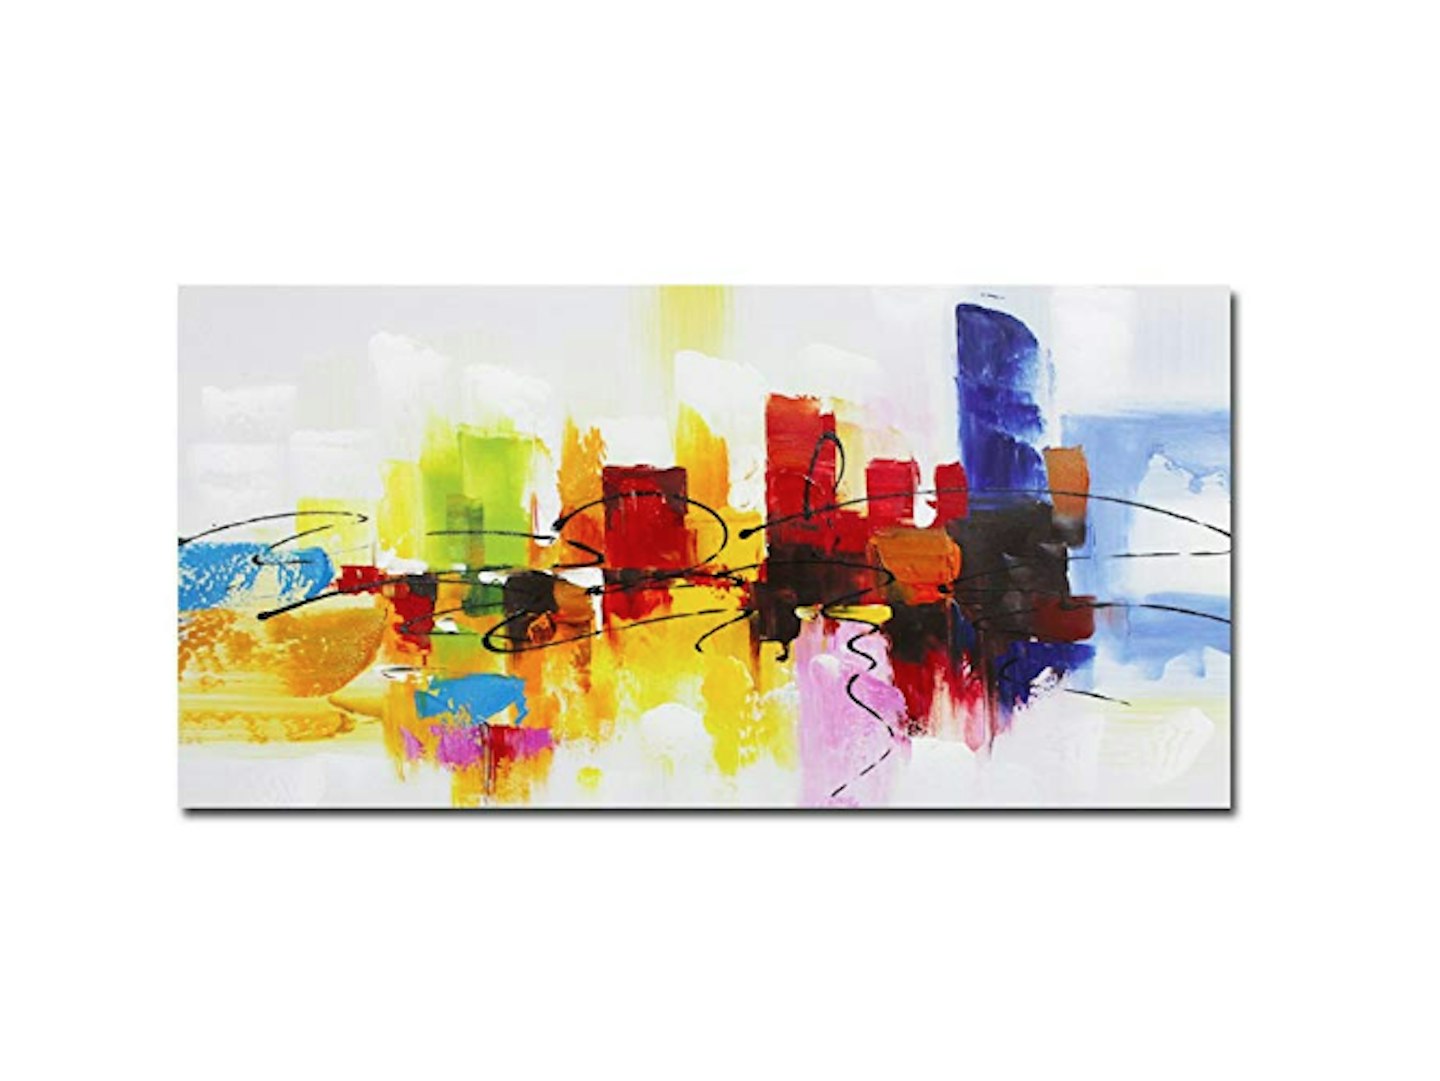 Fokenzary Hand Painted Colorful Abstract Painting on Canvas, 39.99